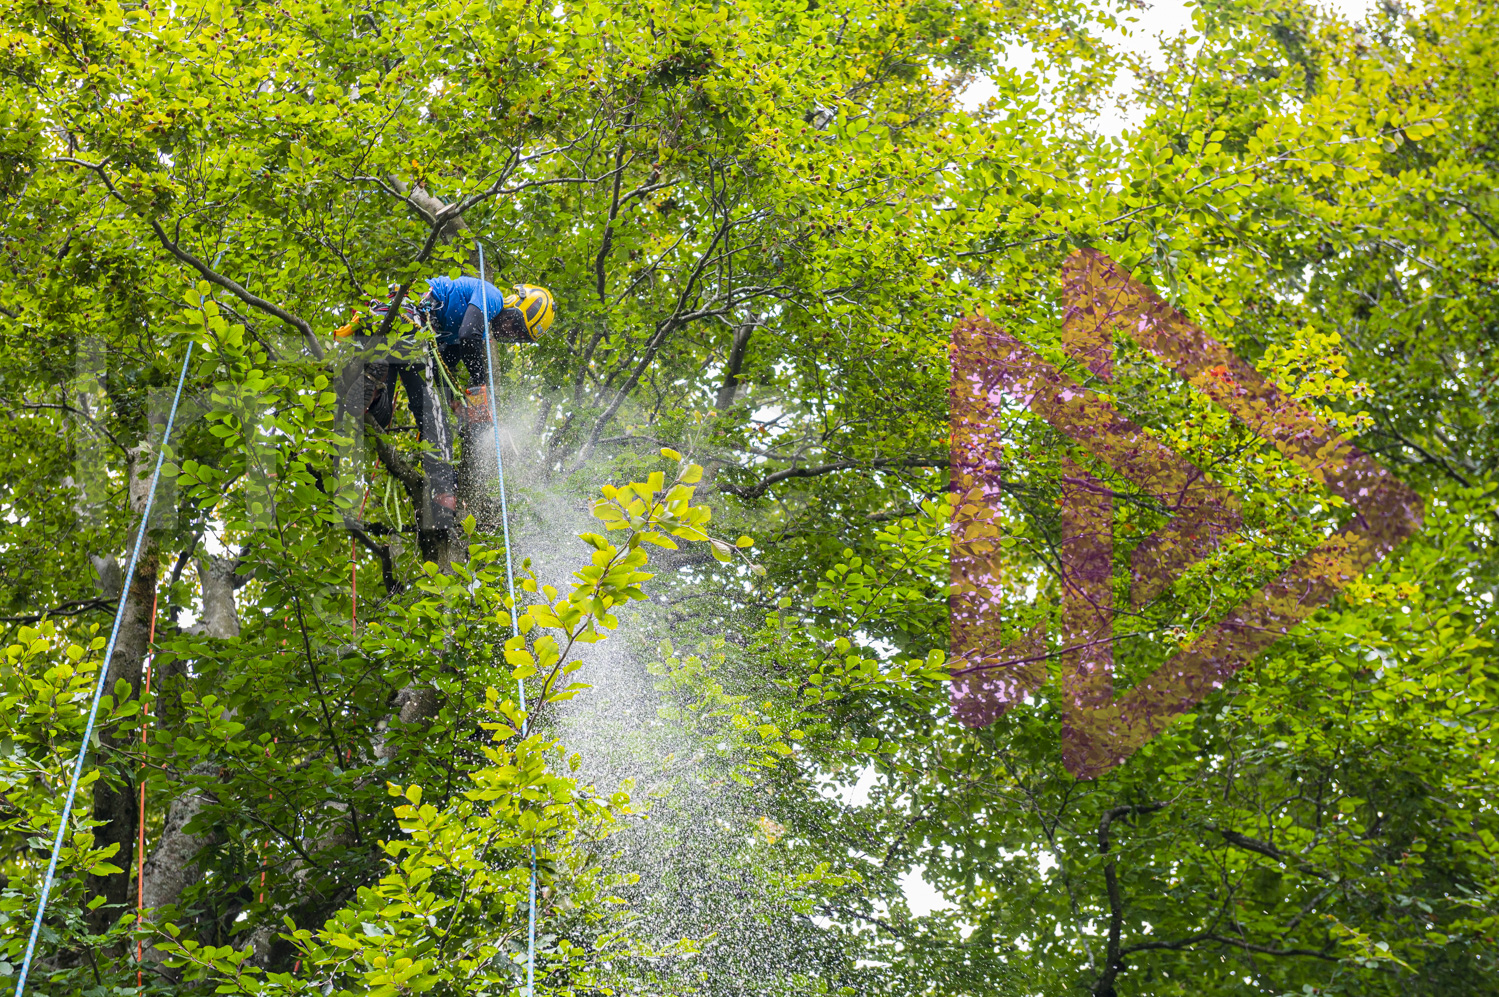 Climbing arborist operating chainsaw in a beech tree canopy